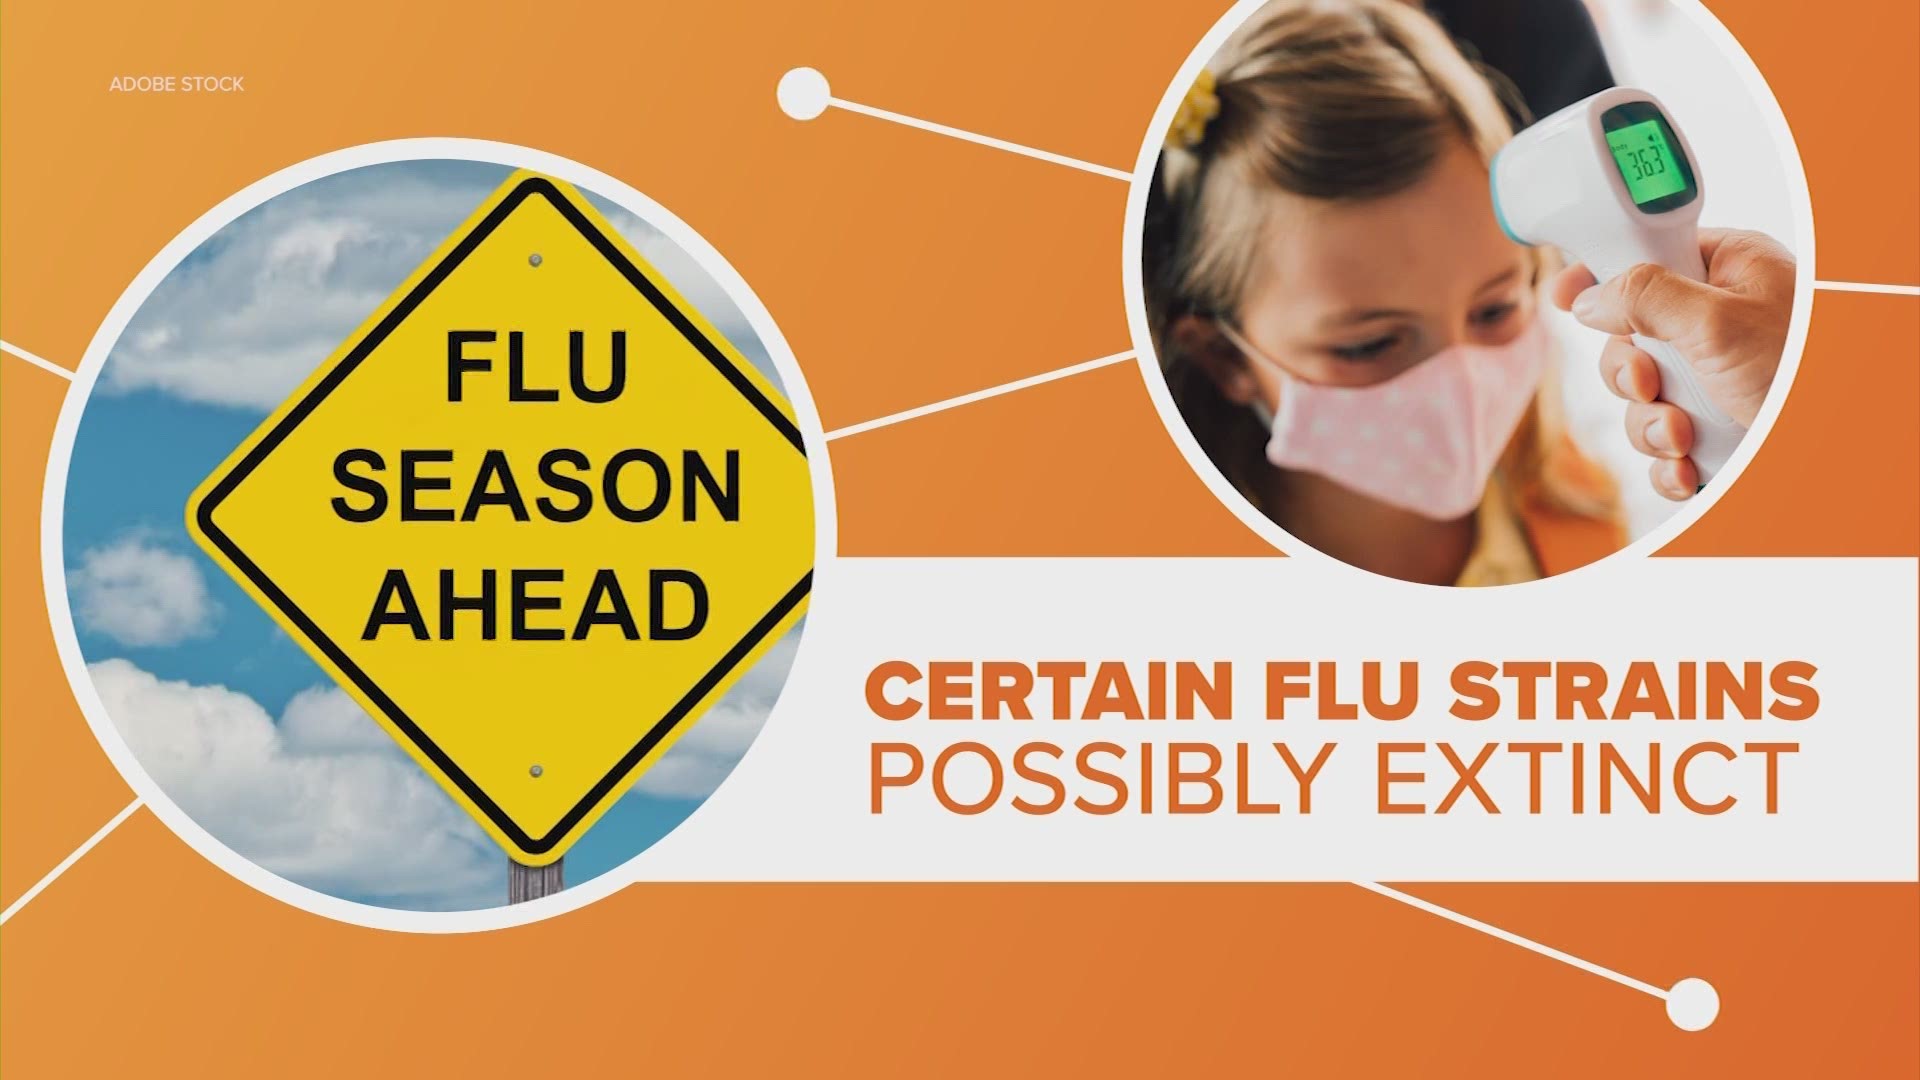 According to reports, there has been so little flu that a couple strains may have gone extinct during the coronavirus pandemic.